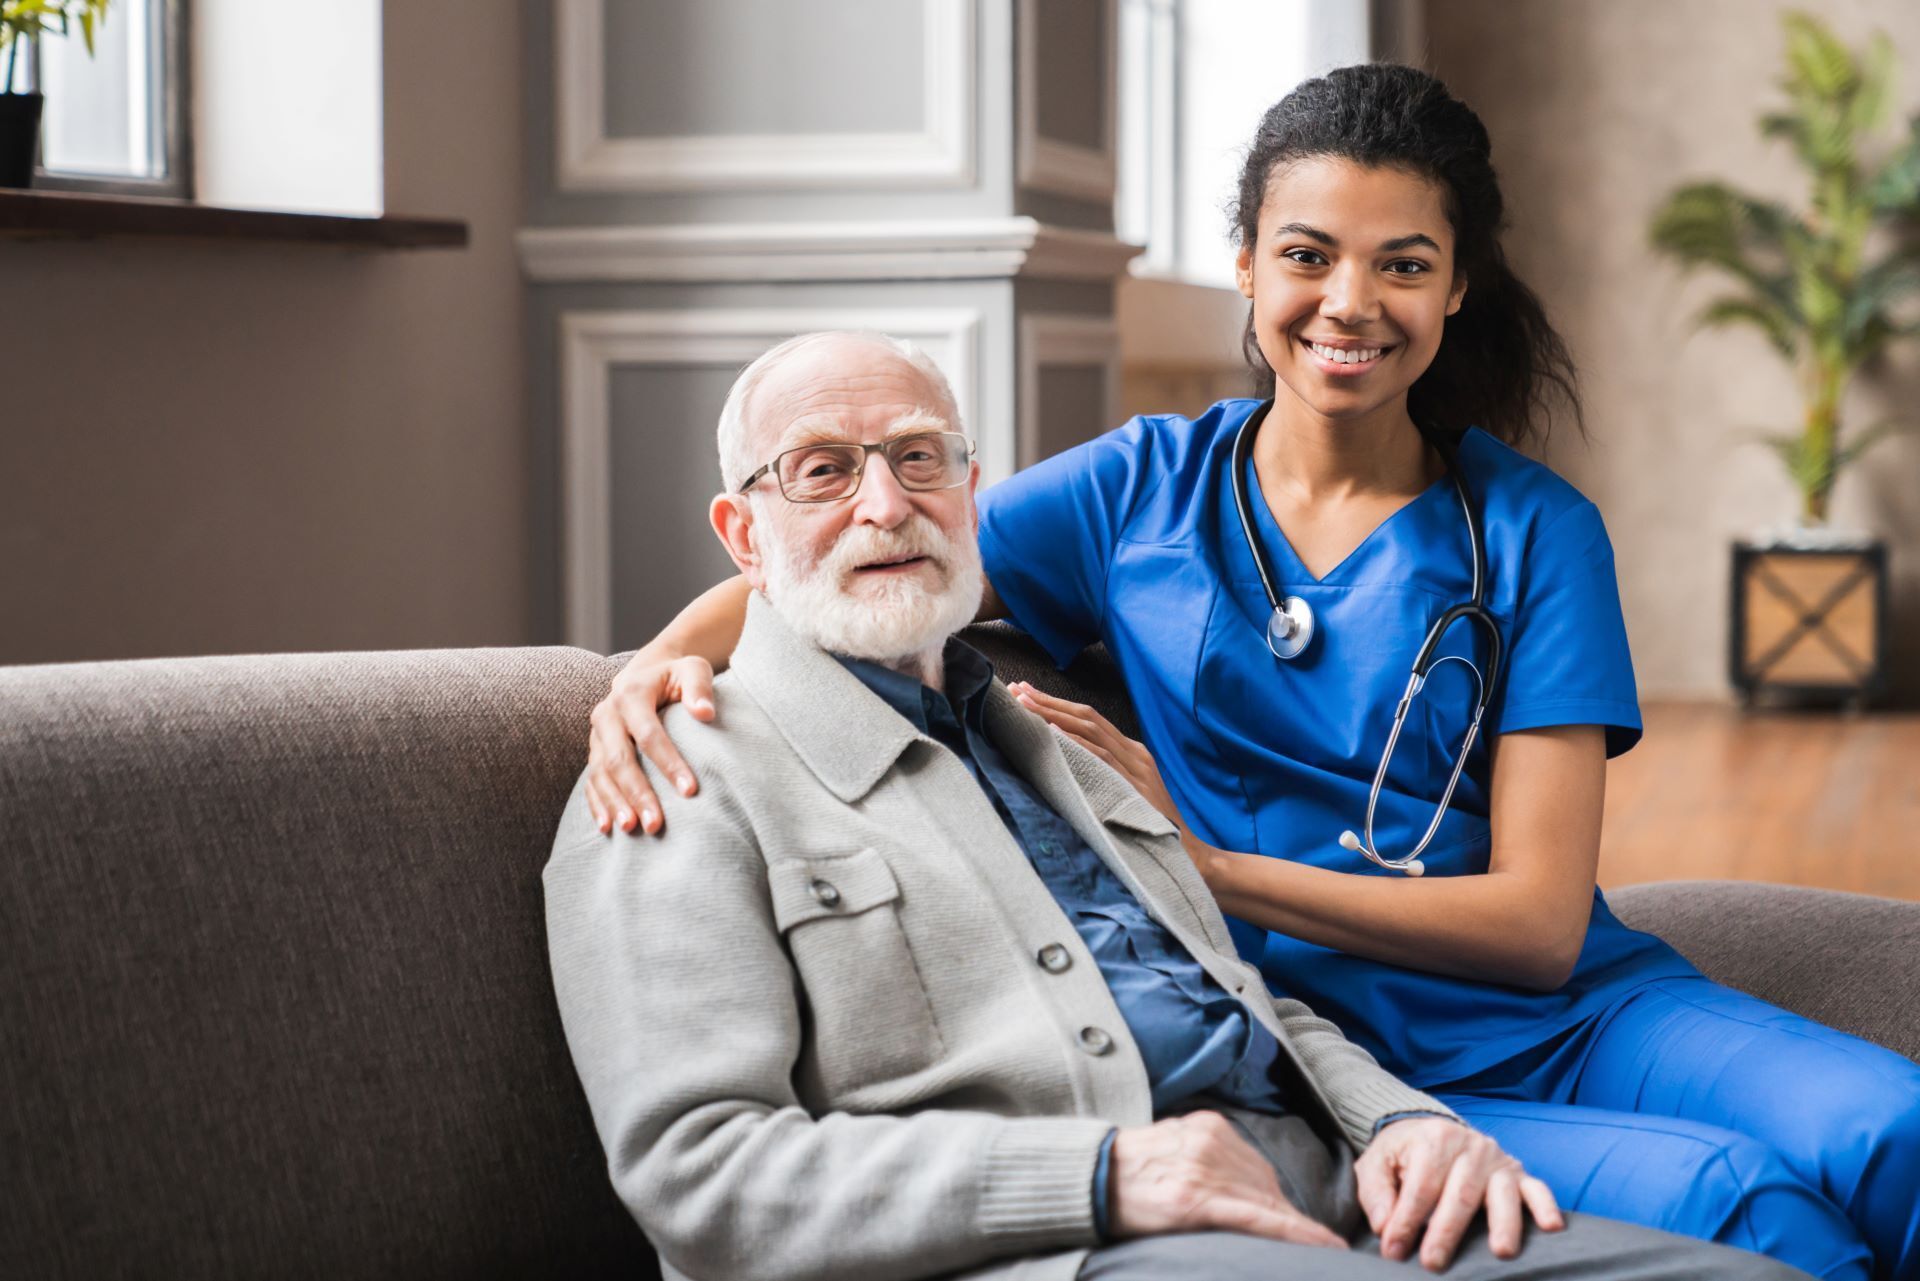 caregiver and patient sitting on couch looking at camera smiling